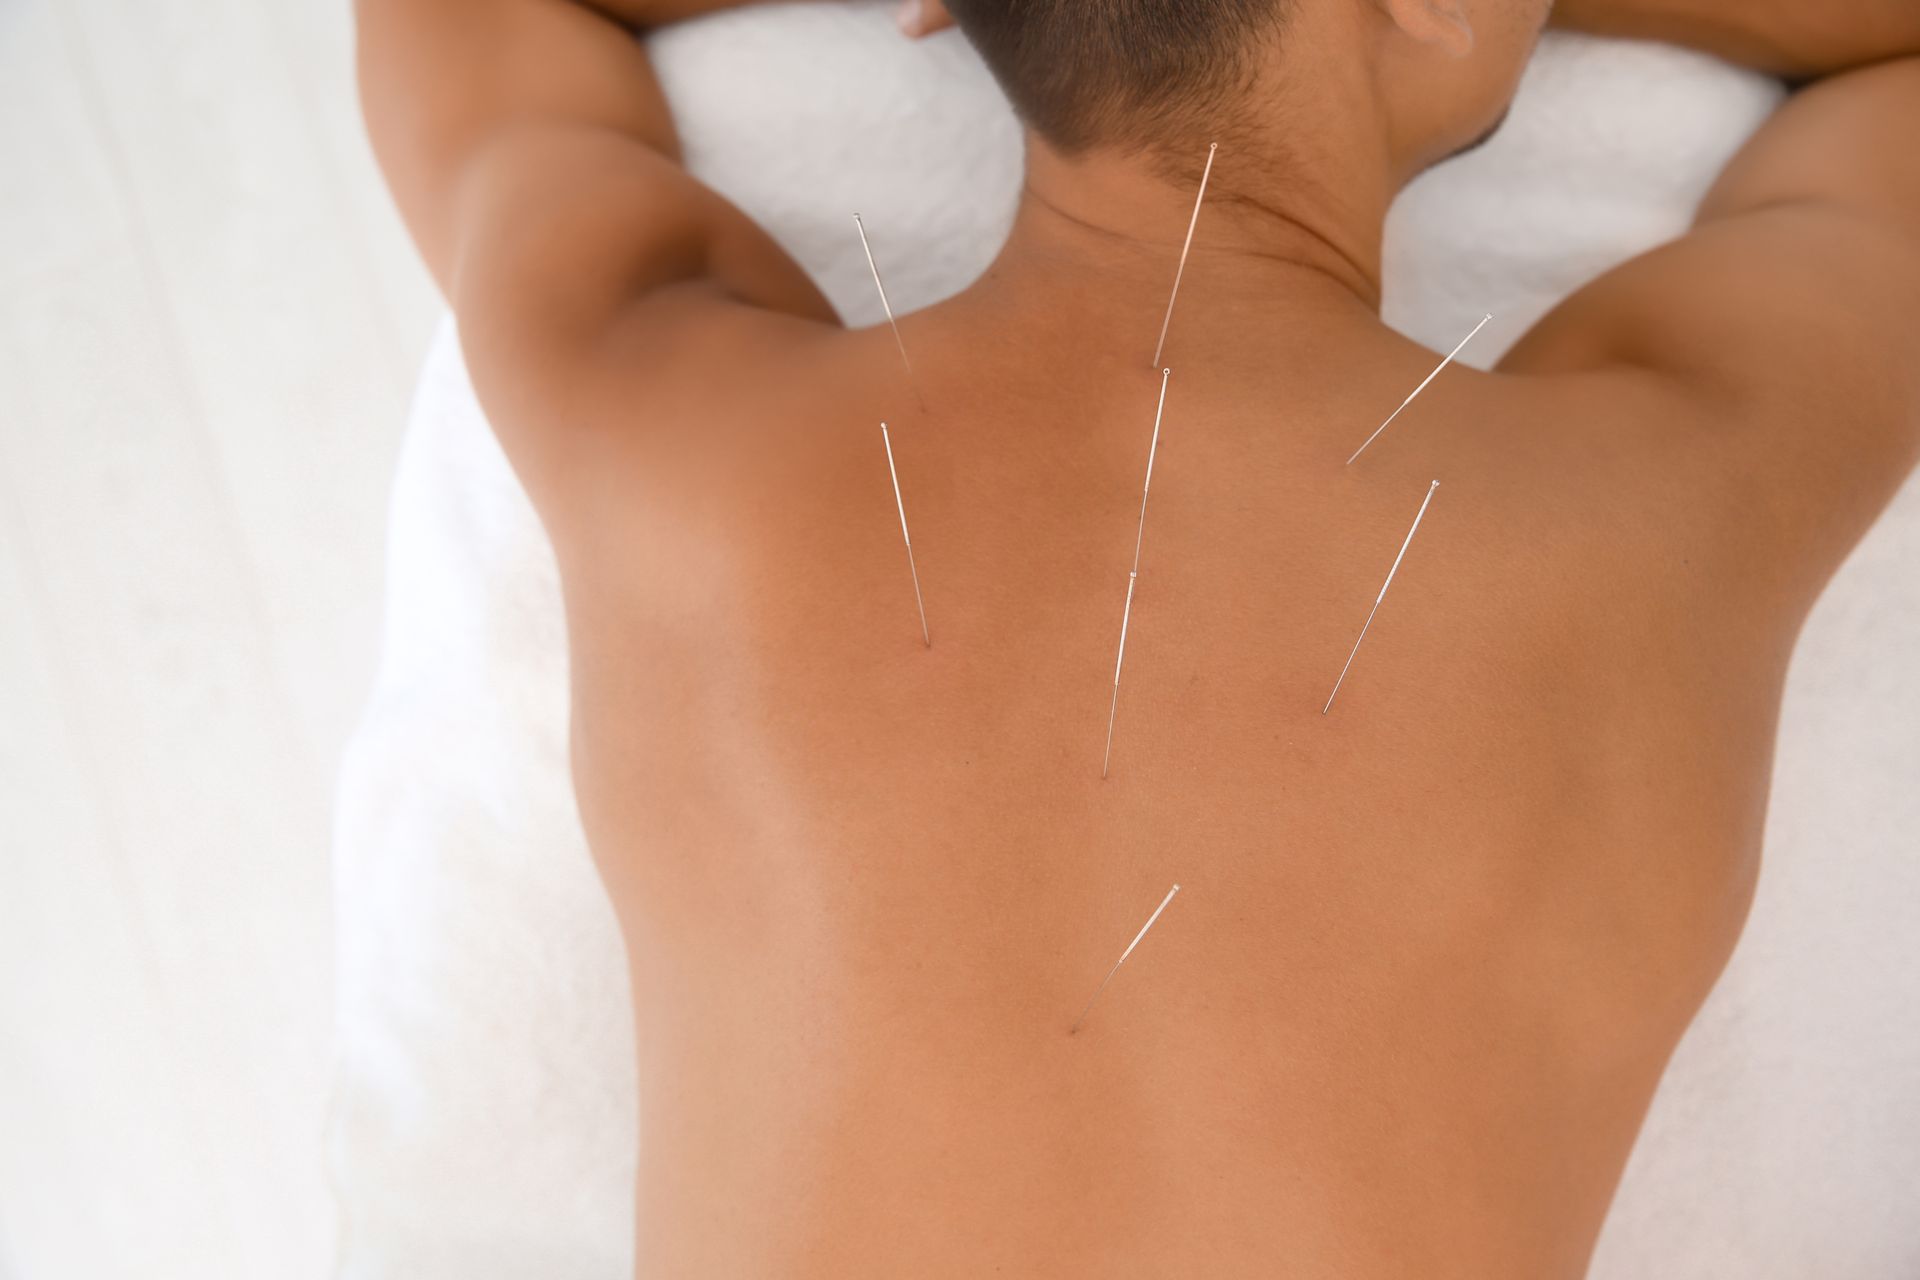 A man is getting acupuncture on his back to promote better sperm quality